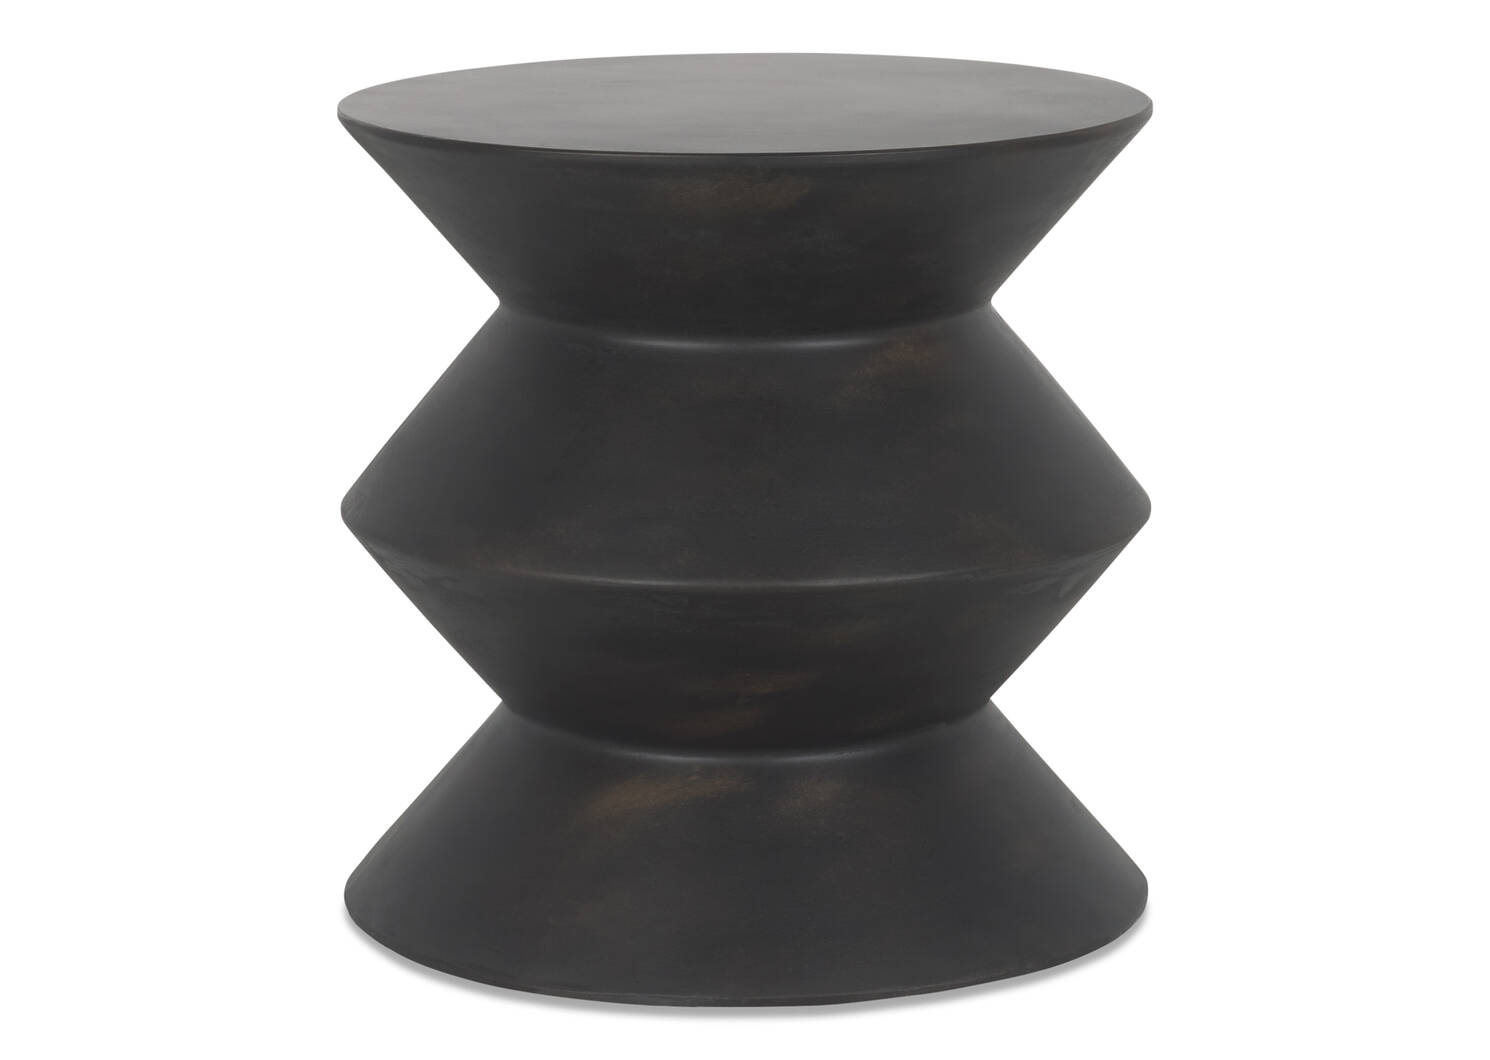 Dayan Accent Table -Peppercorn